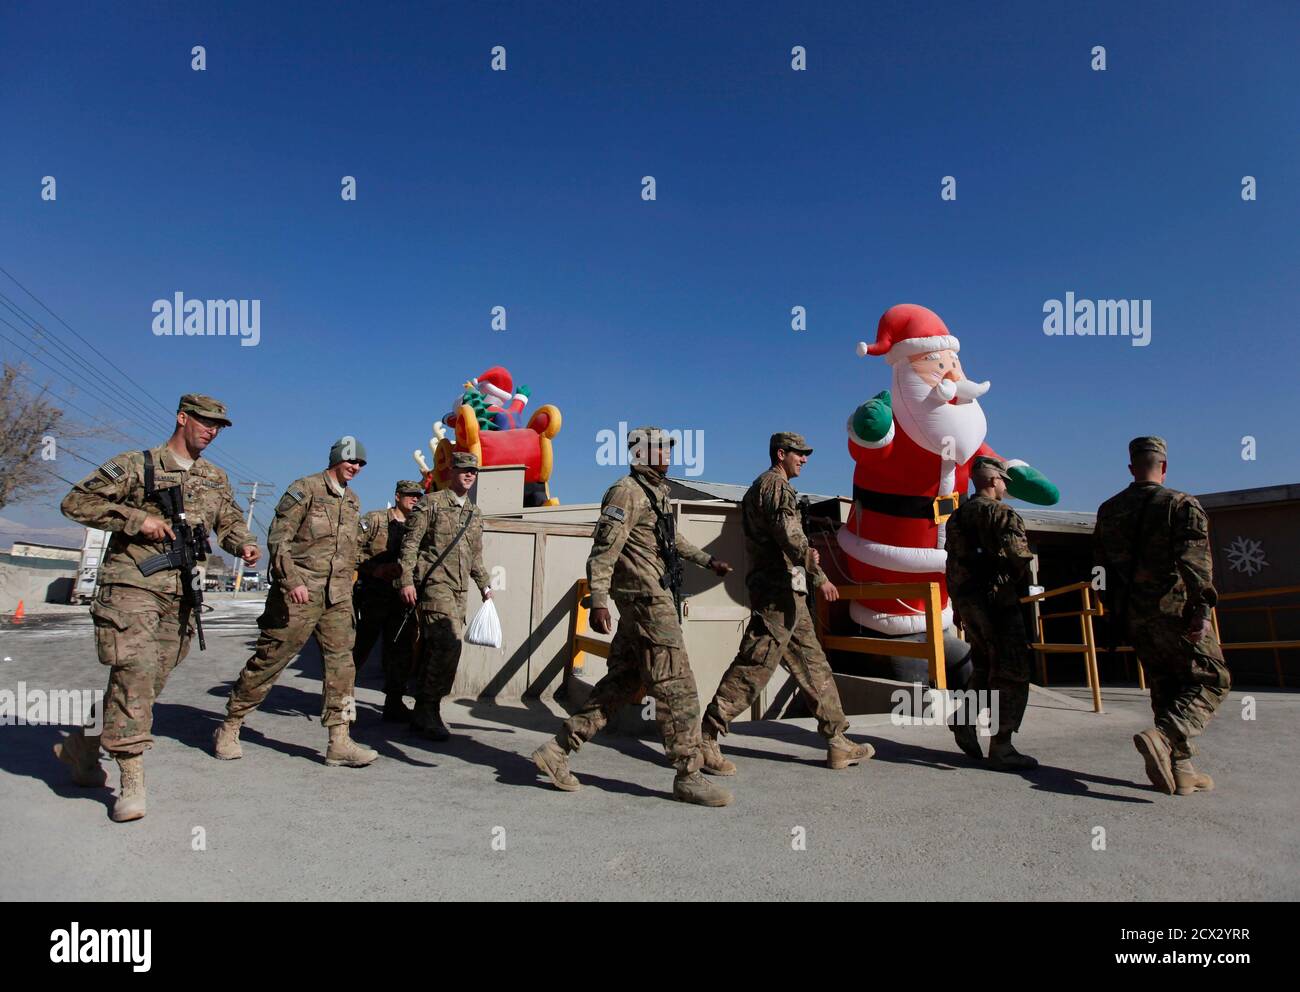 NATO troops from the International Security Assistance Force (ISAF) walk during Christmas celebrations at Bagram Airfield, north of Kabul, December 25, 2013. REUTERS/Mohammad Ismail (AFGHANISTAN - Tags: MILITARY SOCIETY) Stock Photo